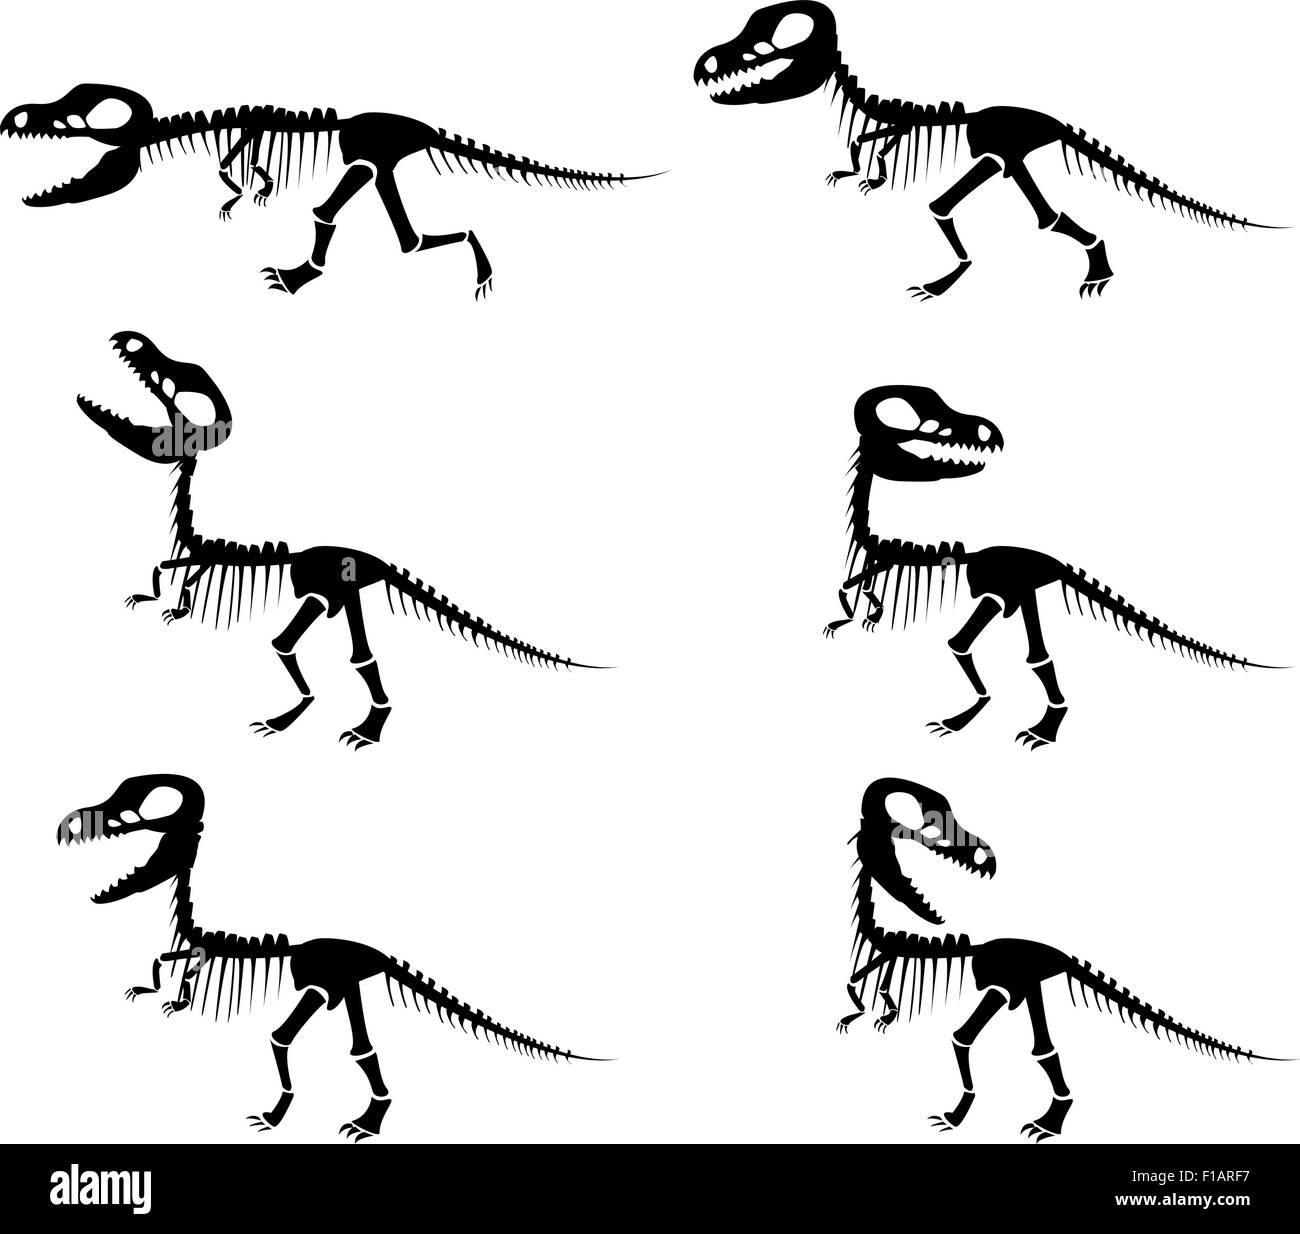 Isolated vector silhouettes of the skeleton of a Tyrannosaurus rex dinosaur in silhouette style. Stock Vector